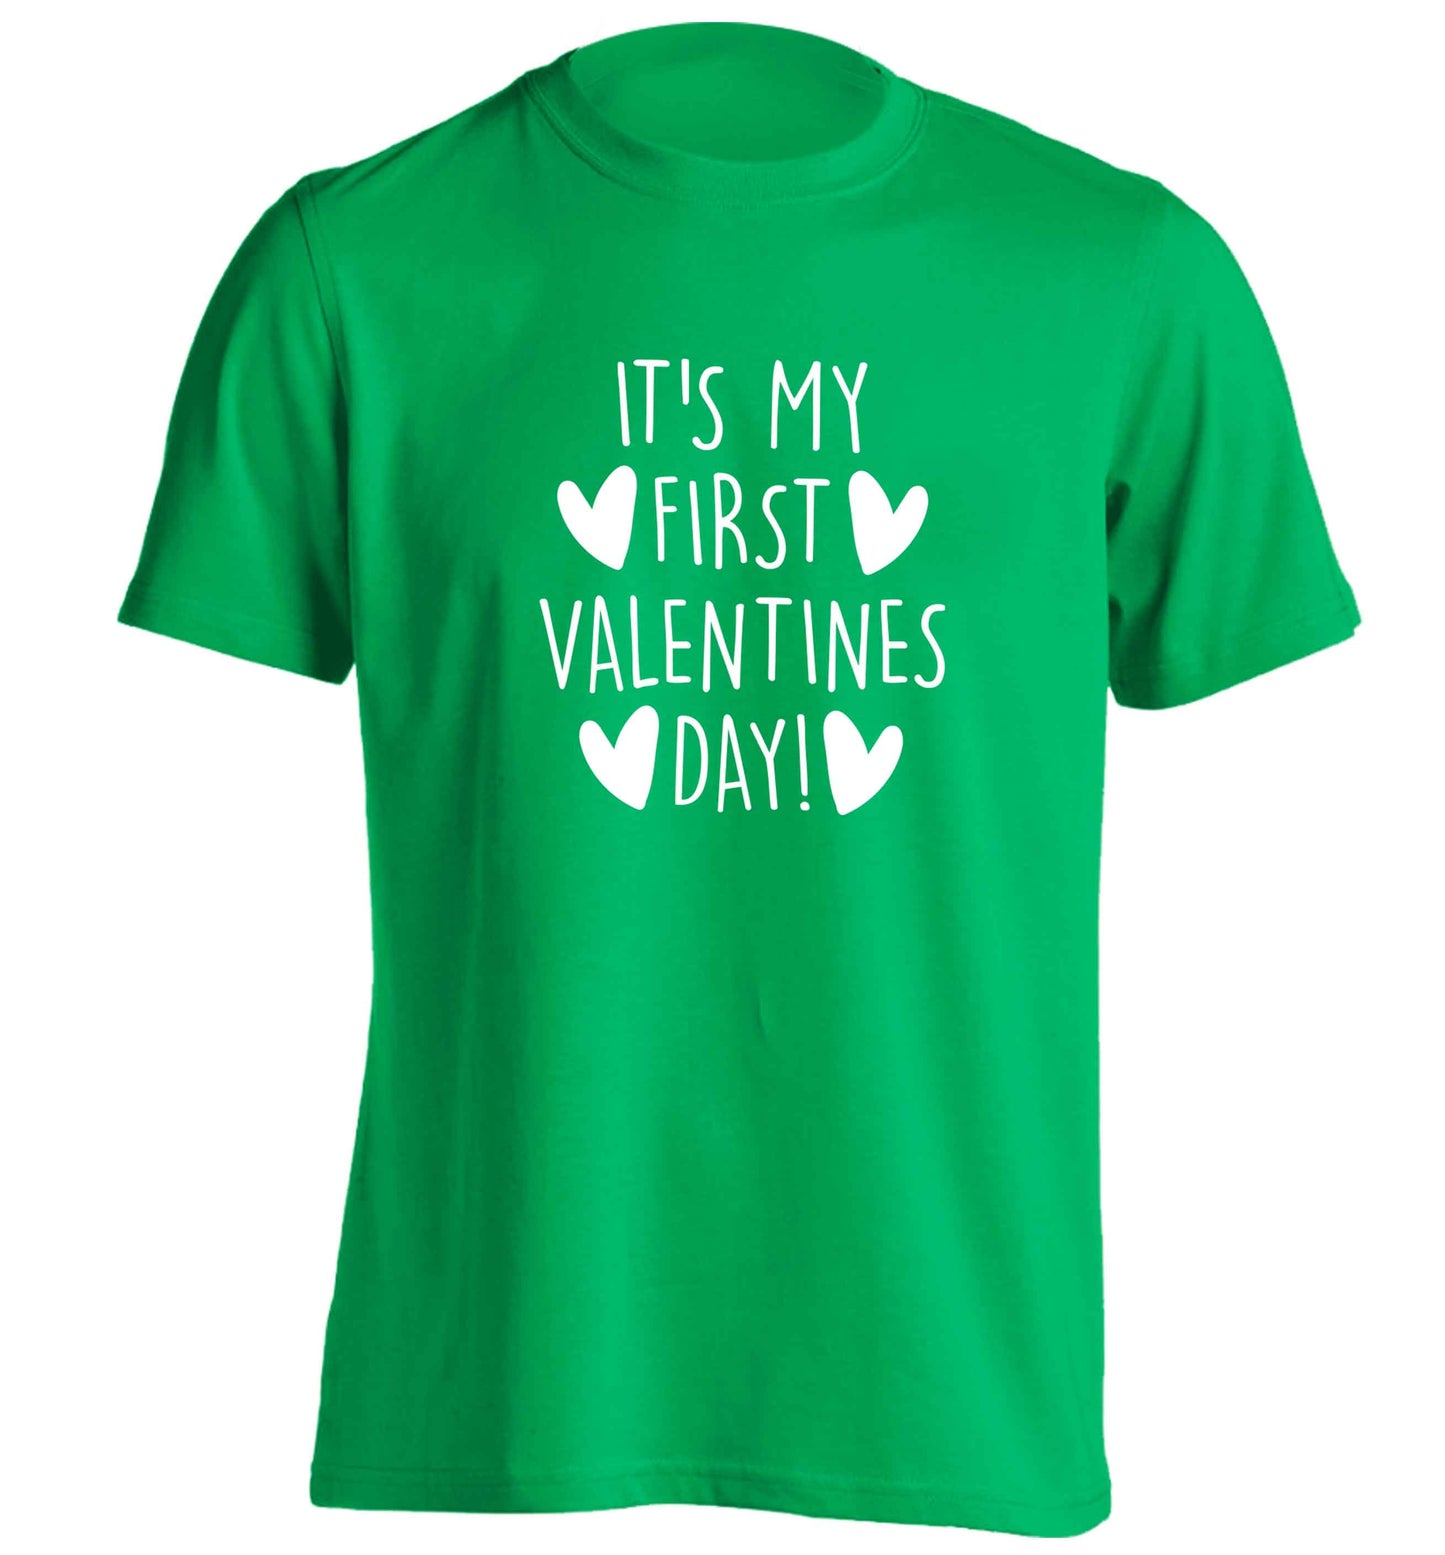 It's my first valentines day! adults unisex green Tshirt 2XL